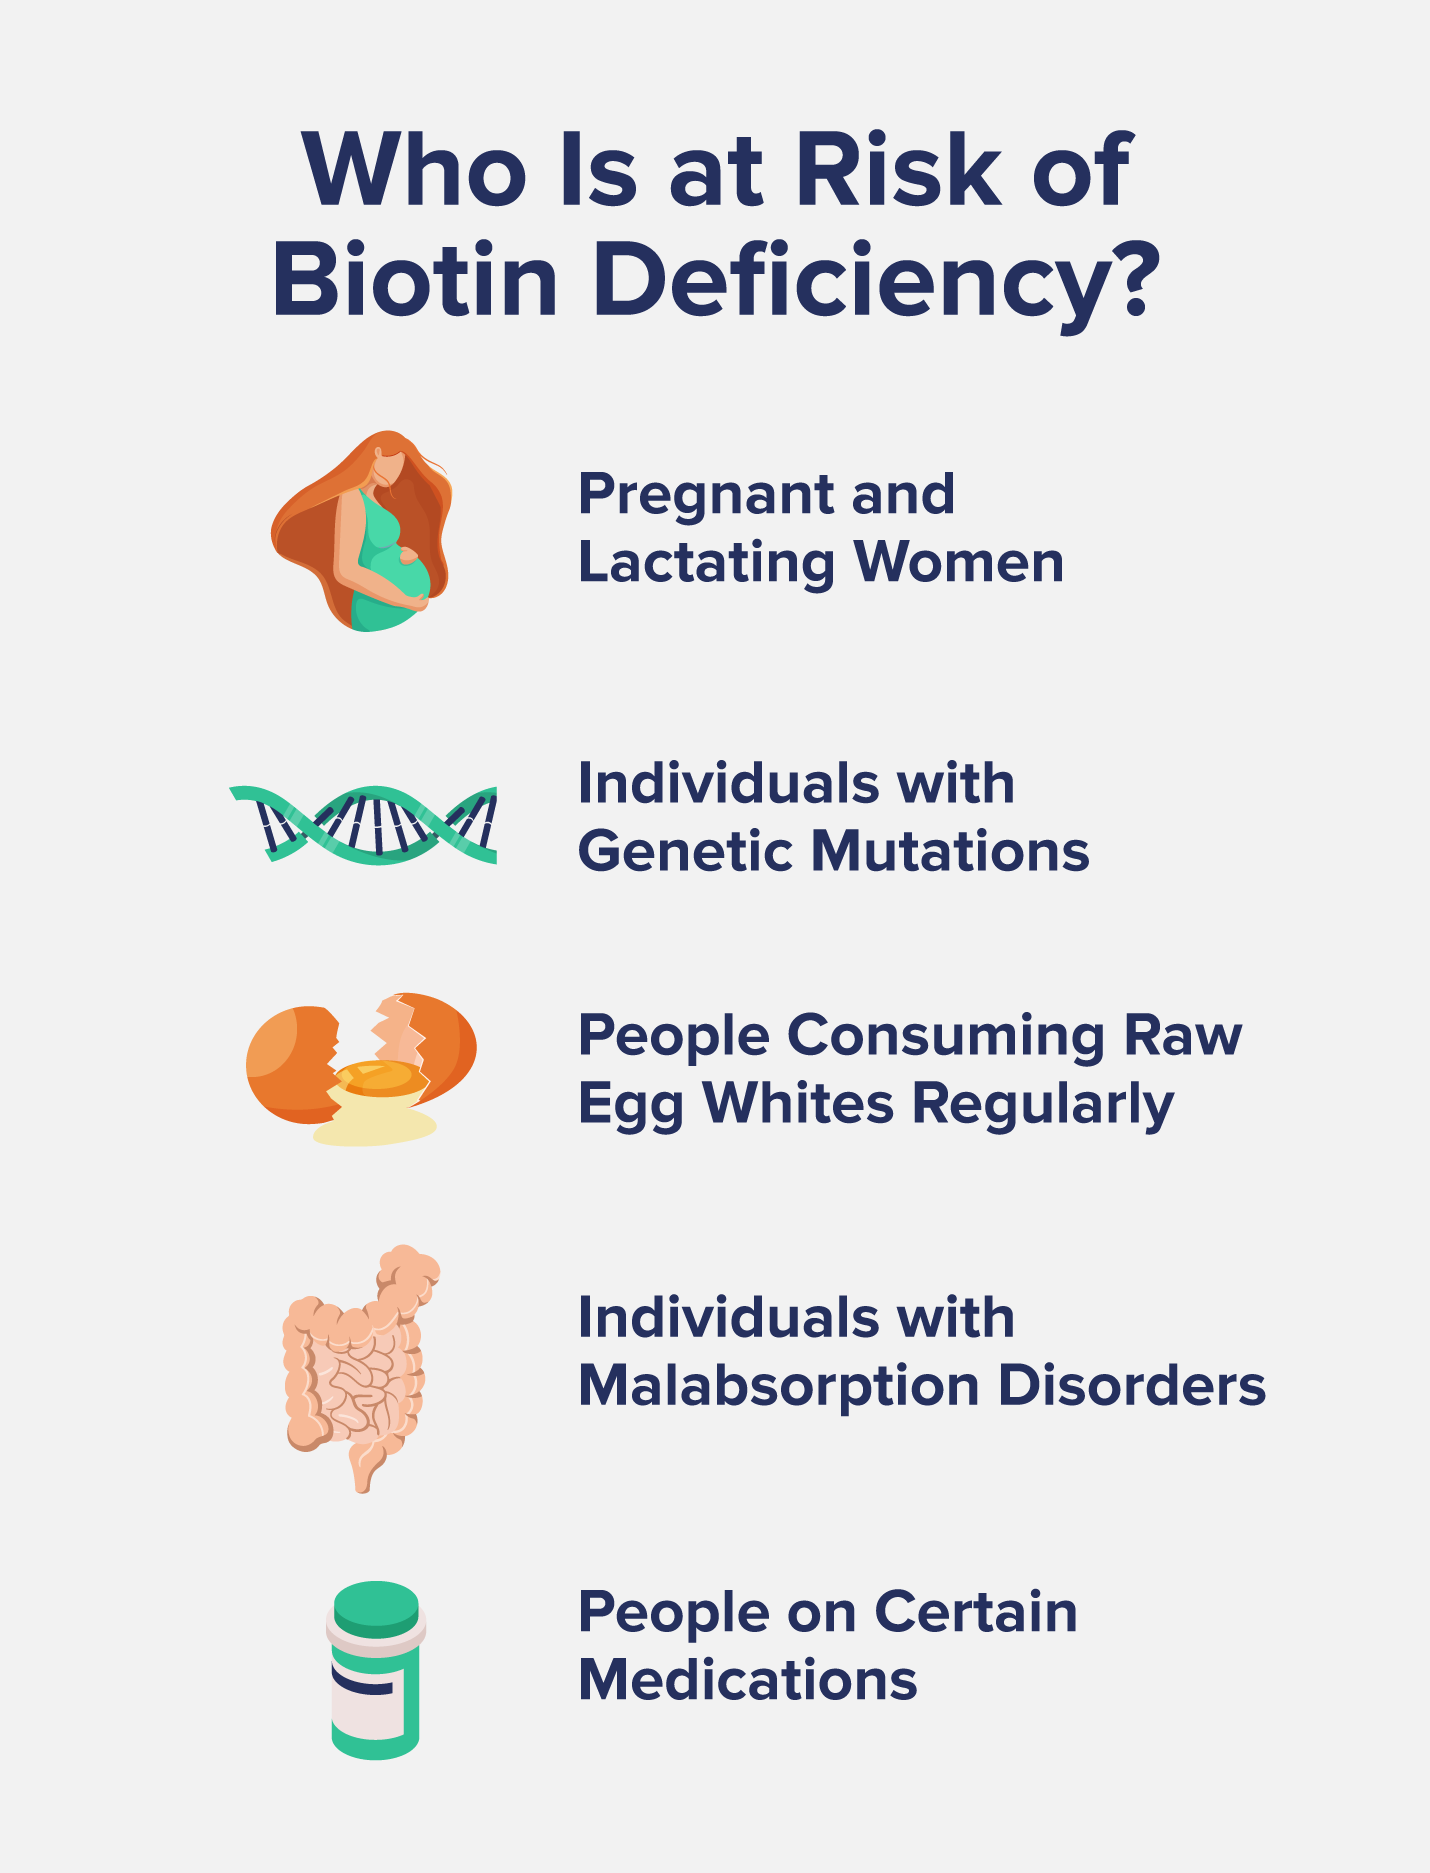 Who is at risk of Biotin Deficiency?- Pregnant and Lactating Women- Individuals with Genetic Mutations- People consuming raw egg whites regularly - Individuals with Malabsorption Disorders- People on certain medications